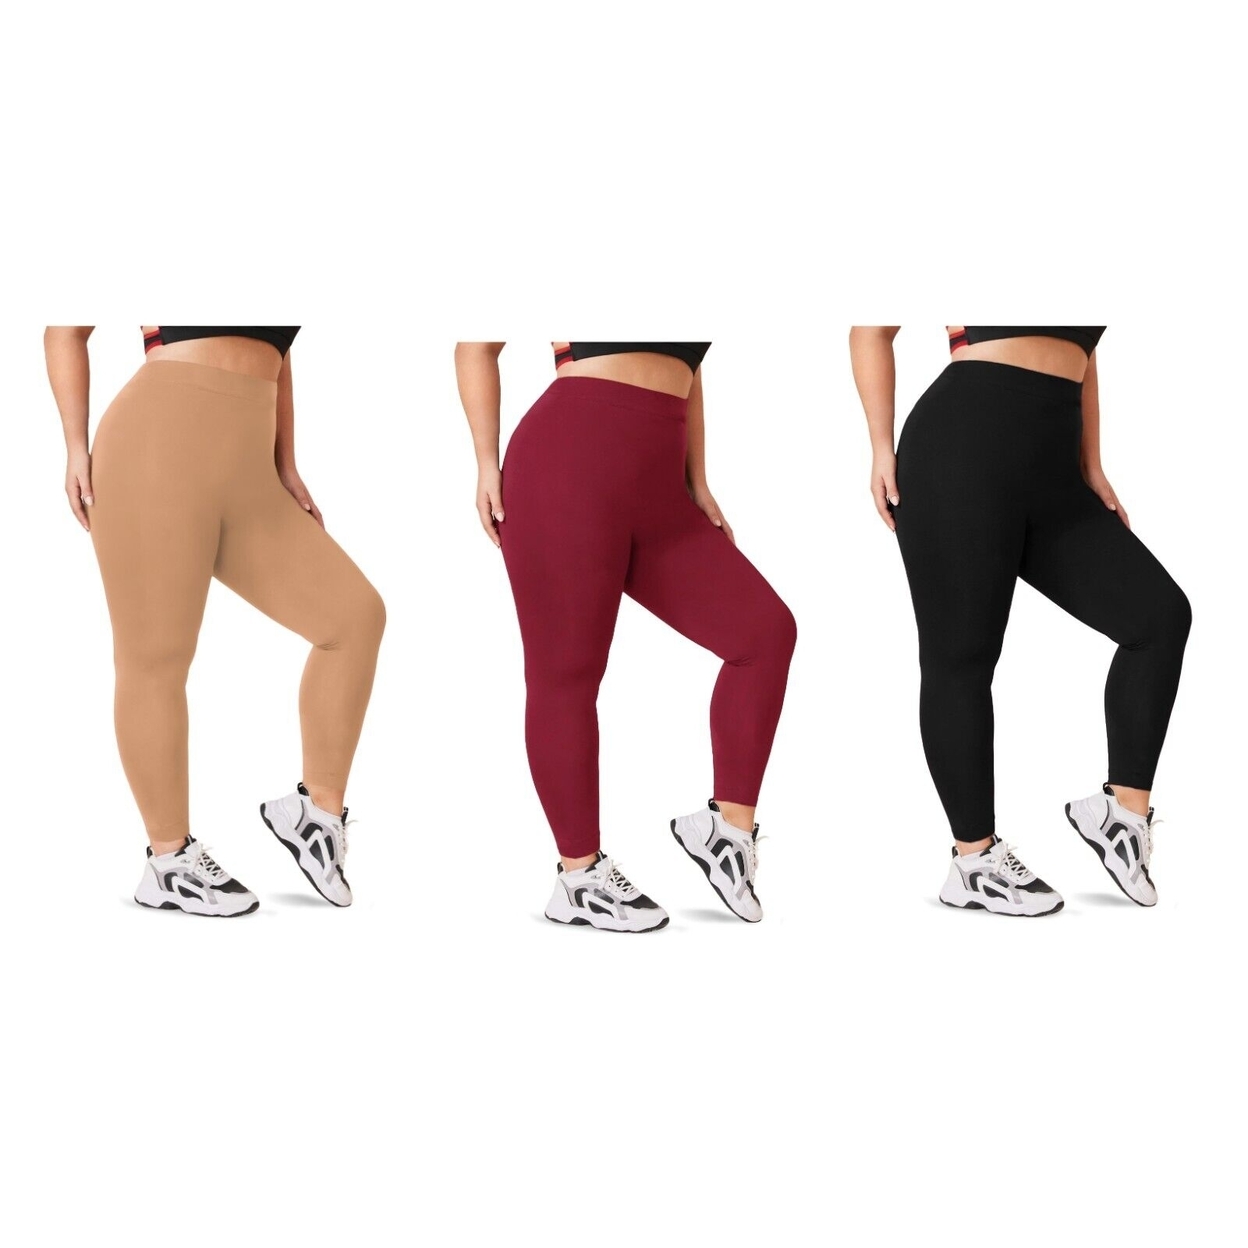 2-Pack: Women's Casual Ultra-Soft Smooth High Waisted Athletic Active Yoga Leggings Plus Size Available - Black & Black, 3x